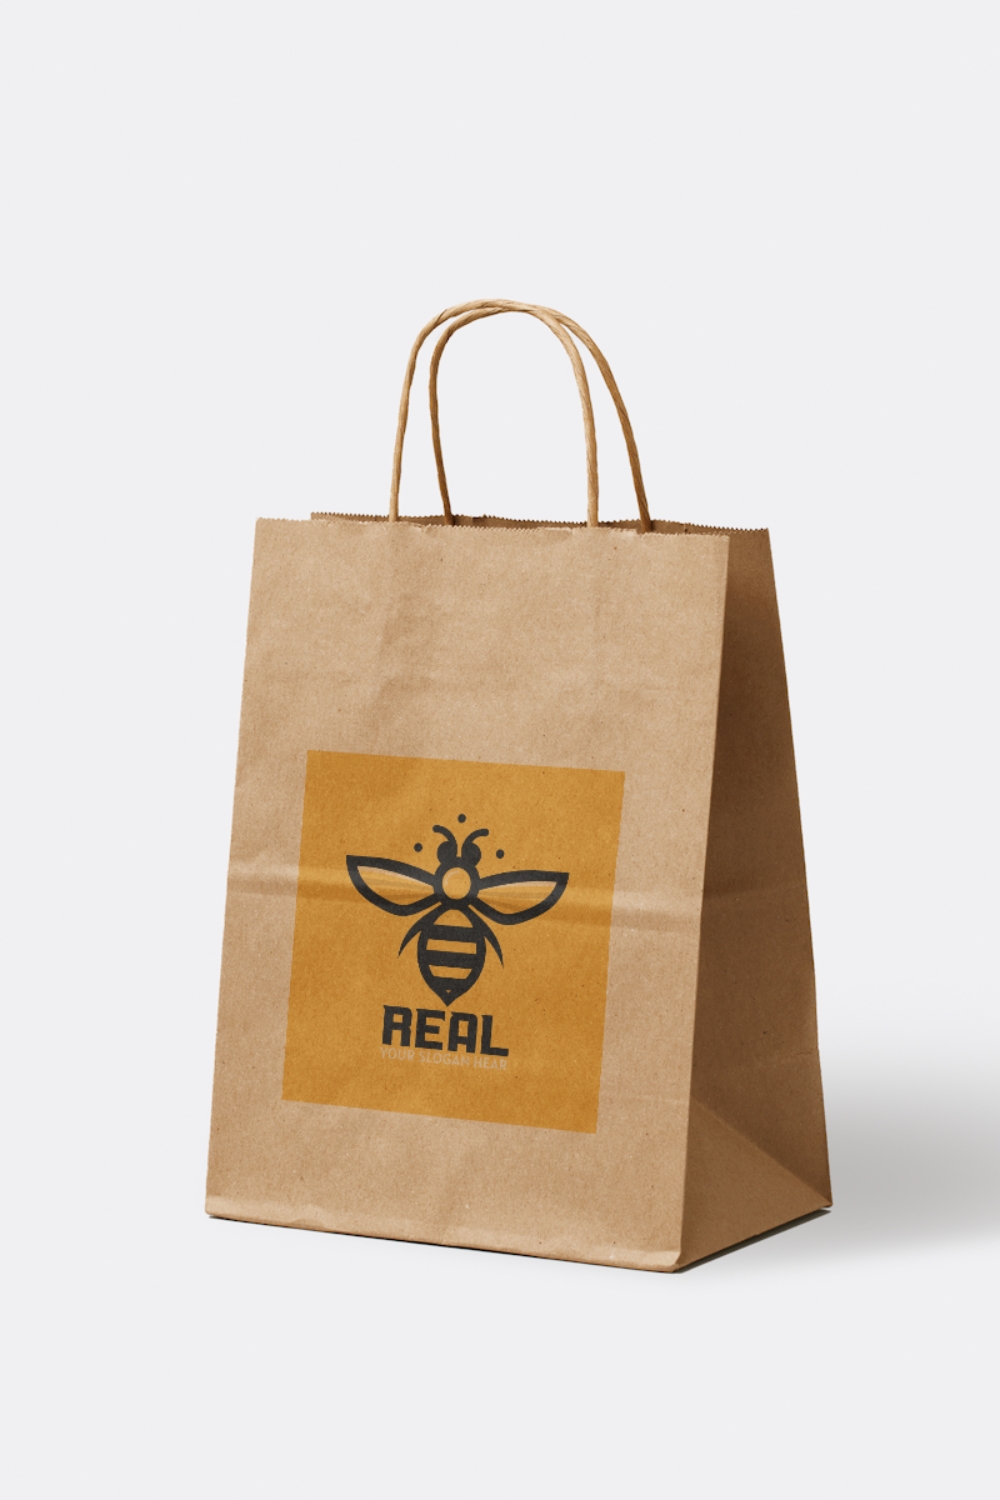 'REAL' HONEYBEE LOGO TEMPLATE FOR ECO-FRIENDLY BRANDS pinterest preview image.